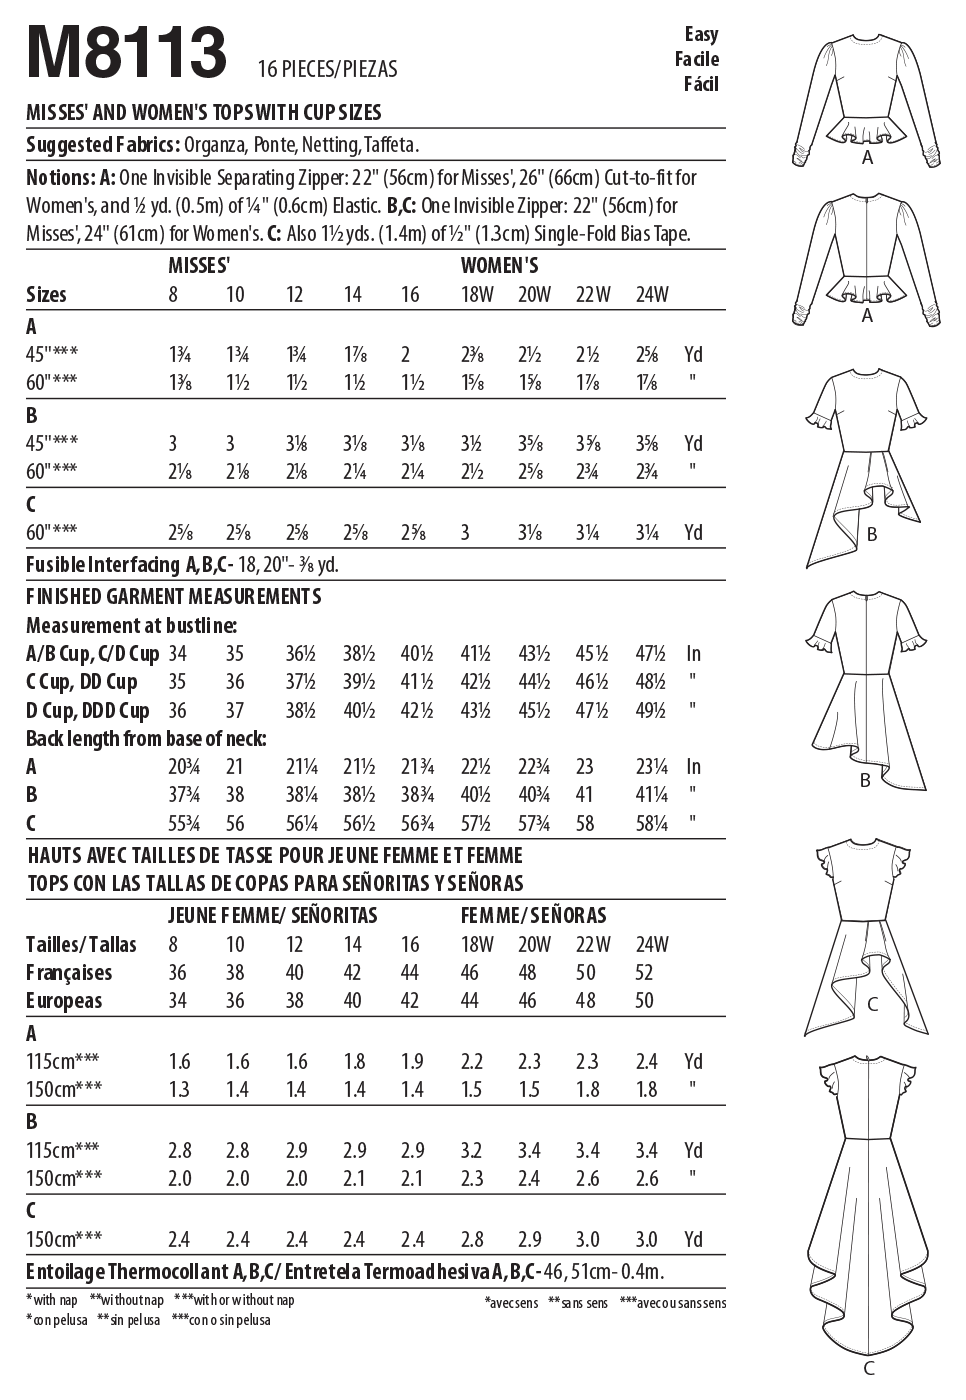 McCalls Sewing Pattern M8113 Misses' & Women's Tops With Cup Sizes Pattern Pieces. #PortiaMcCalls